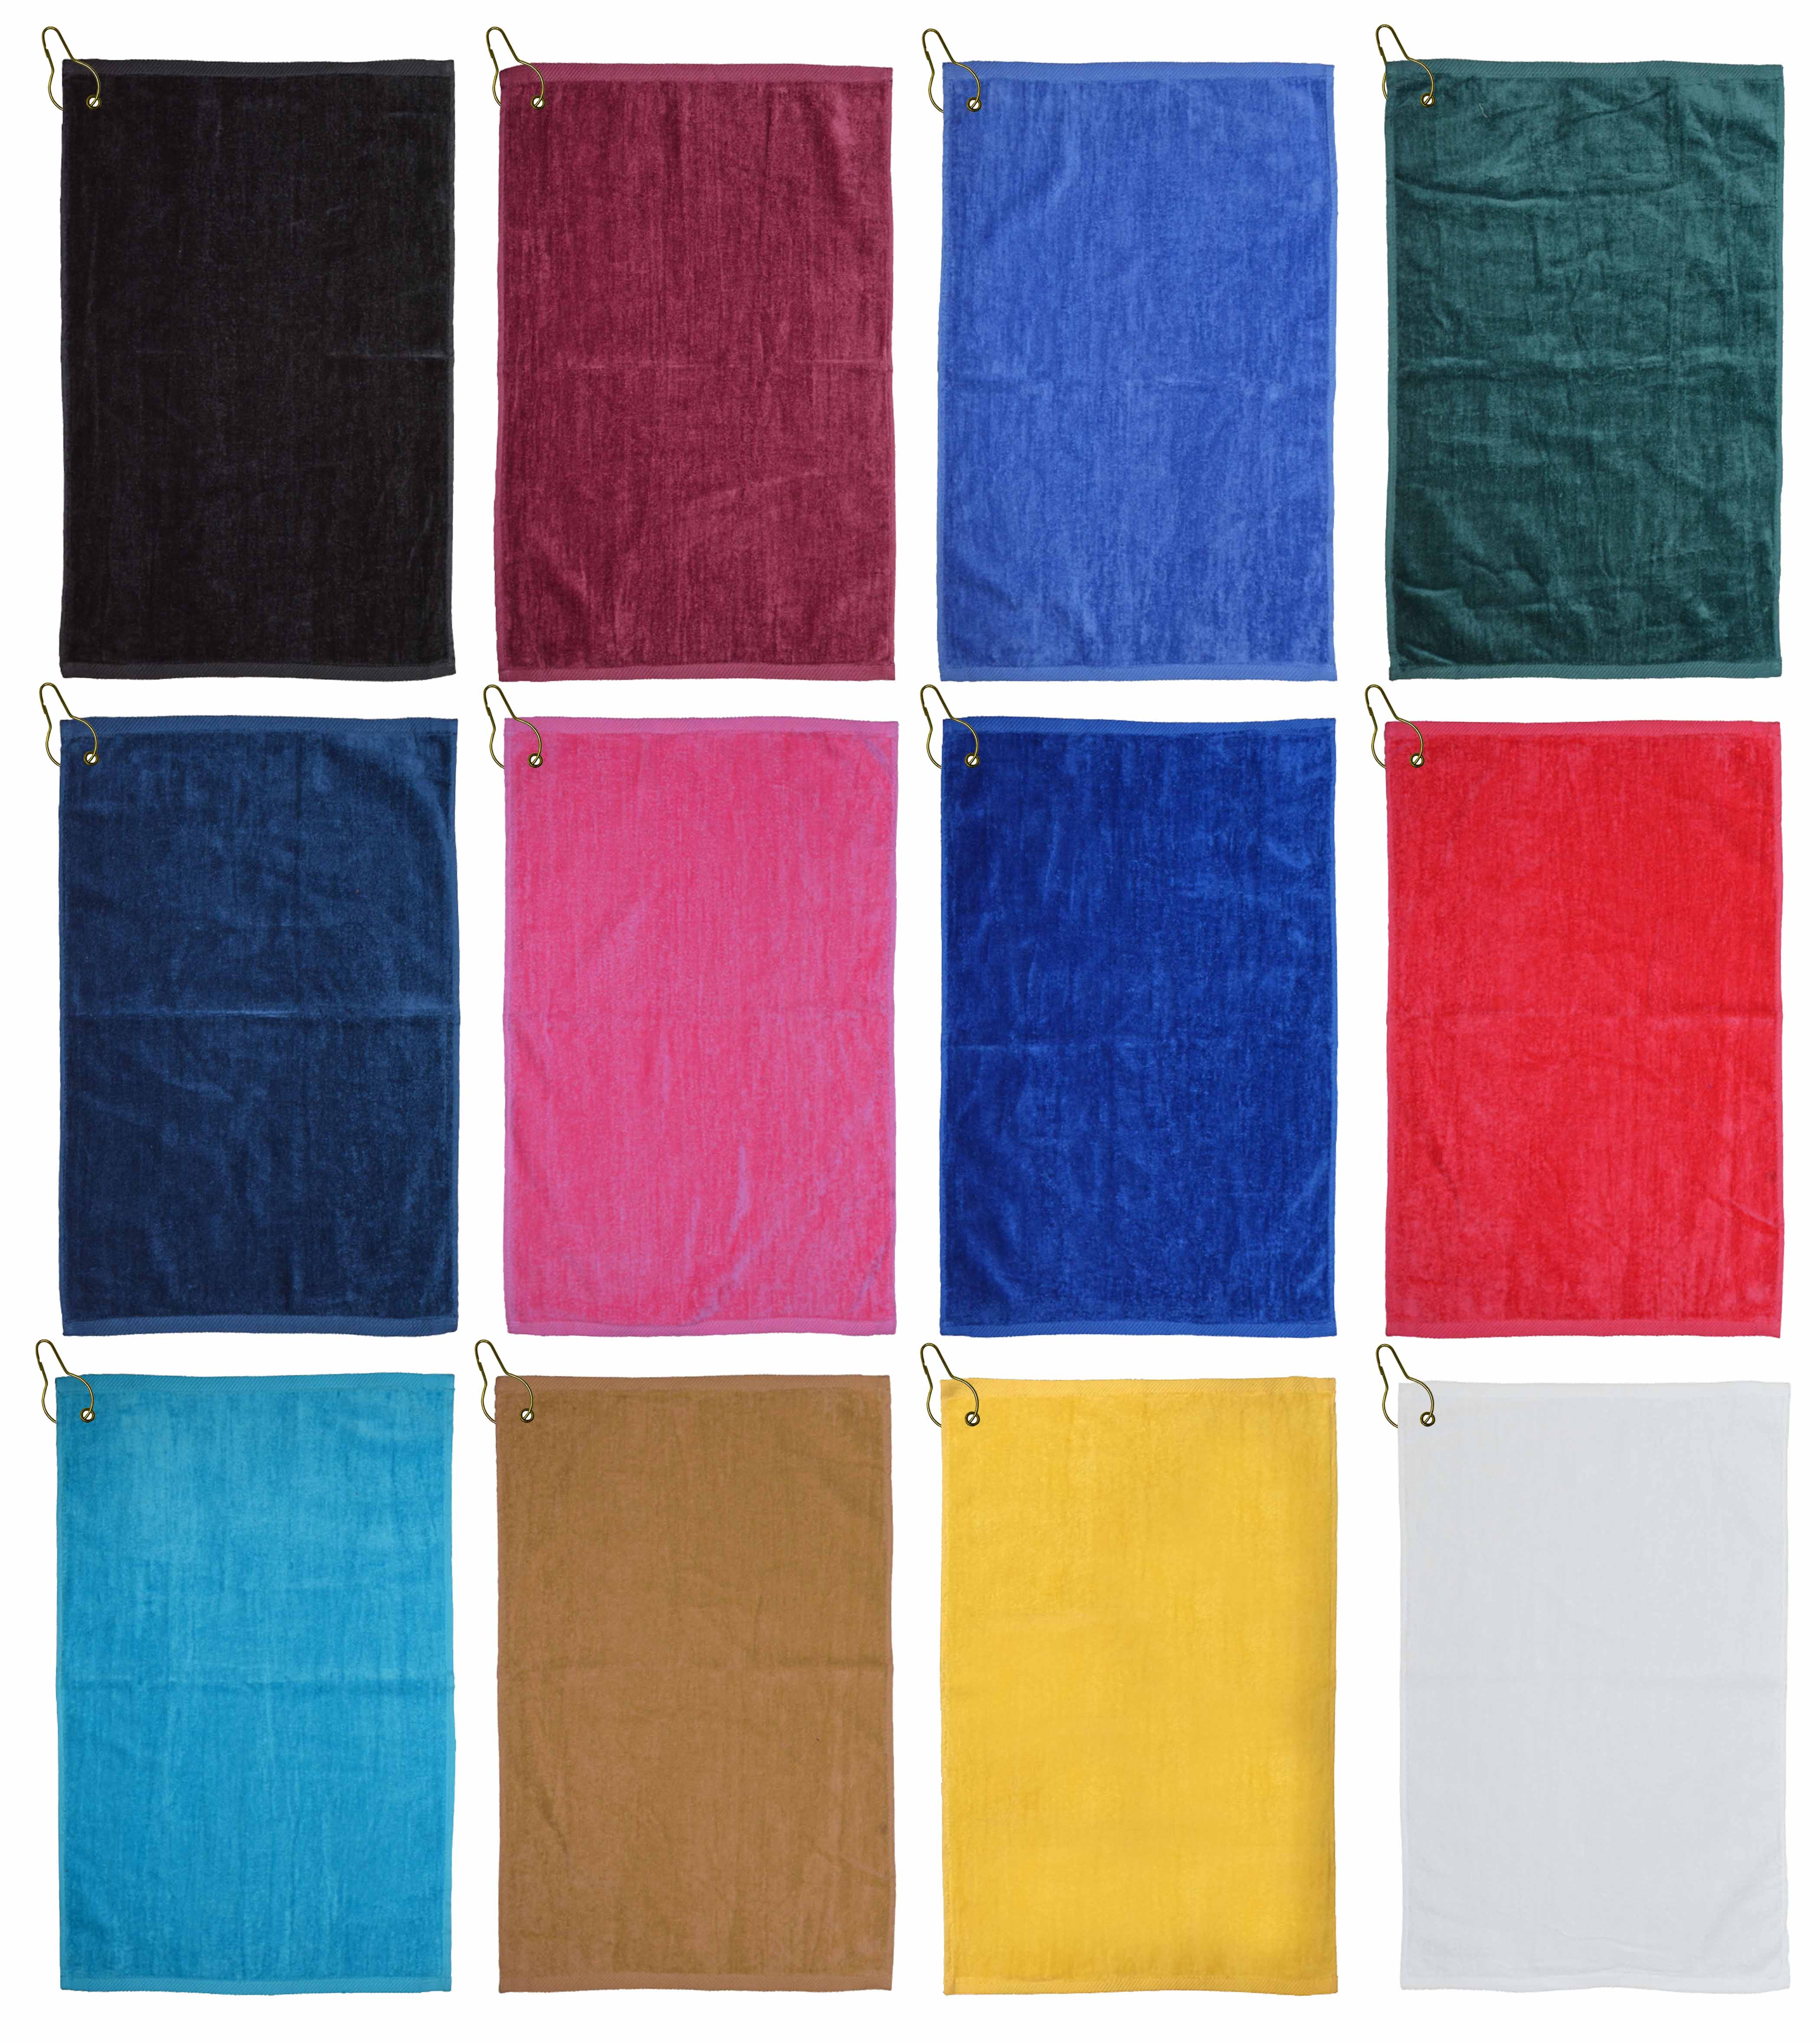 16x25 Open Golf Towels (assorted colors) with Grommet and Hook 100% Combed Cotton, 120 pcs per case.